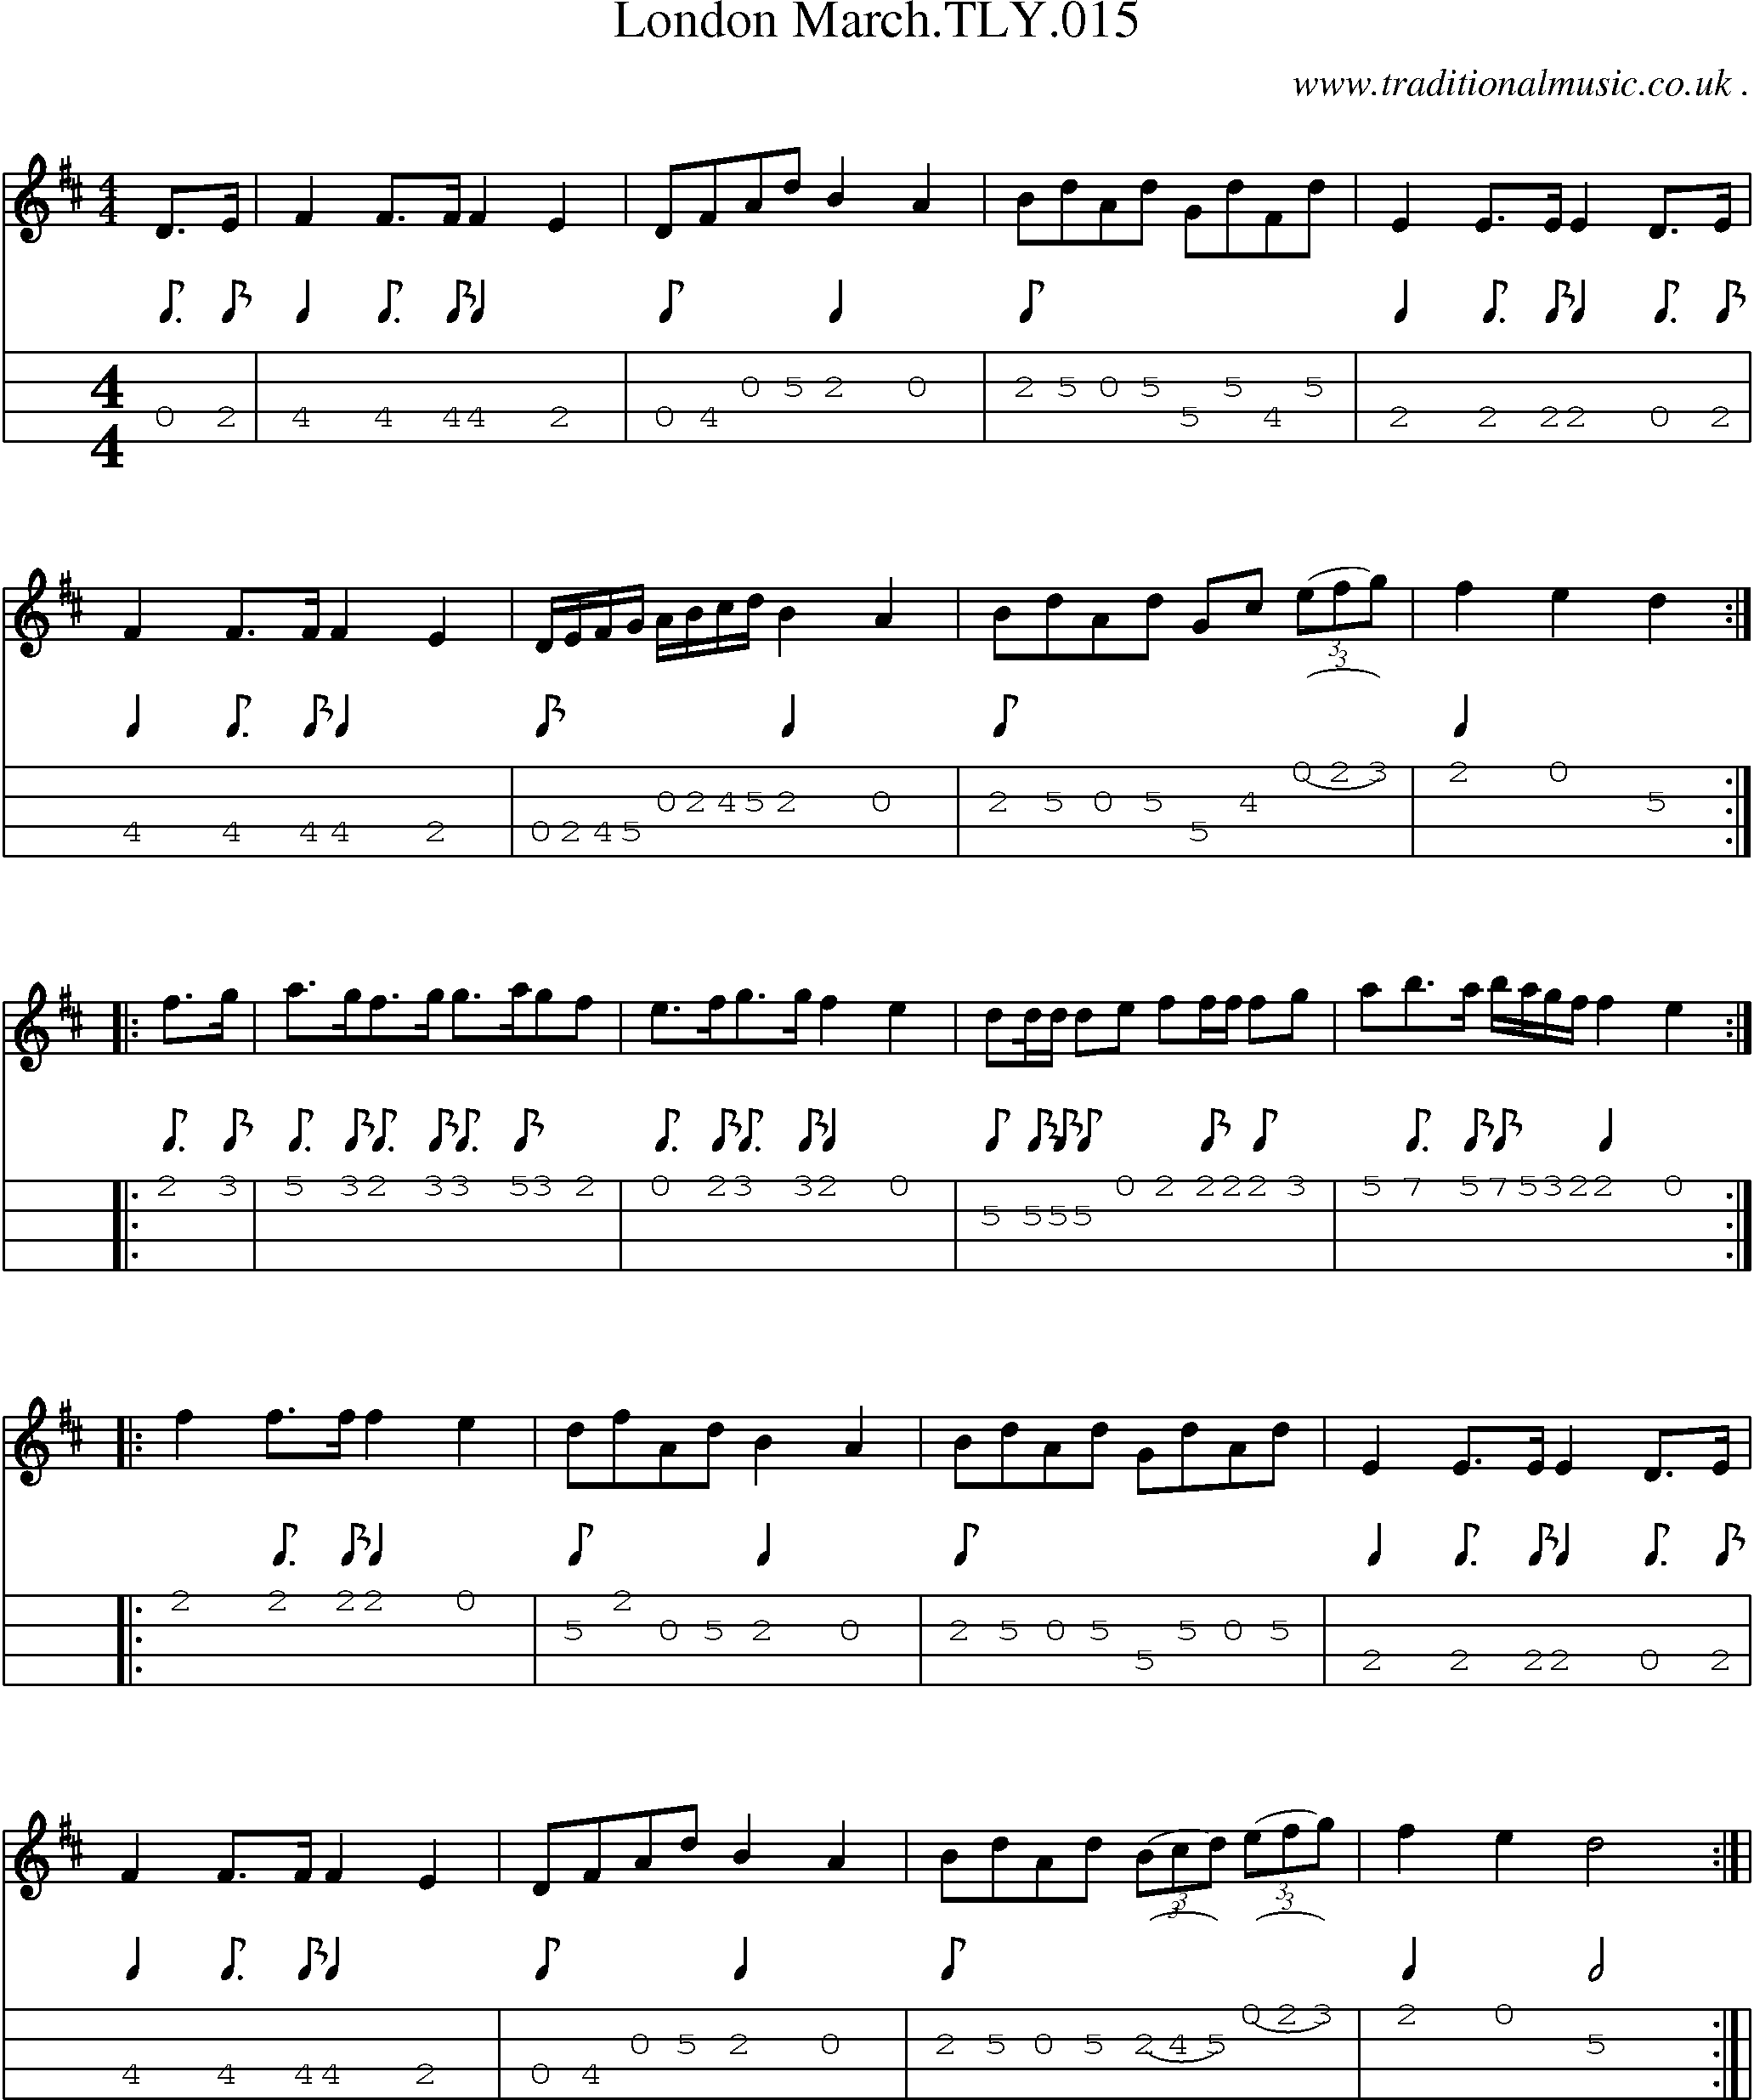 Sheet-Music and Mandolin Tabs for London Marchtly015